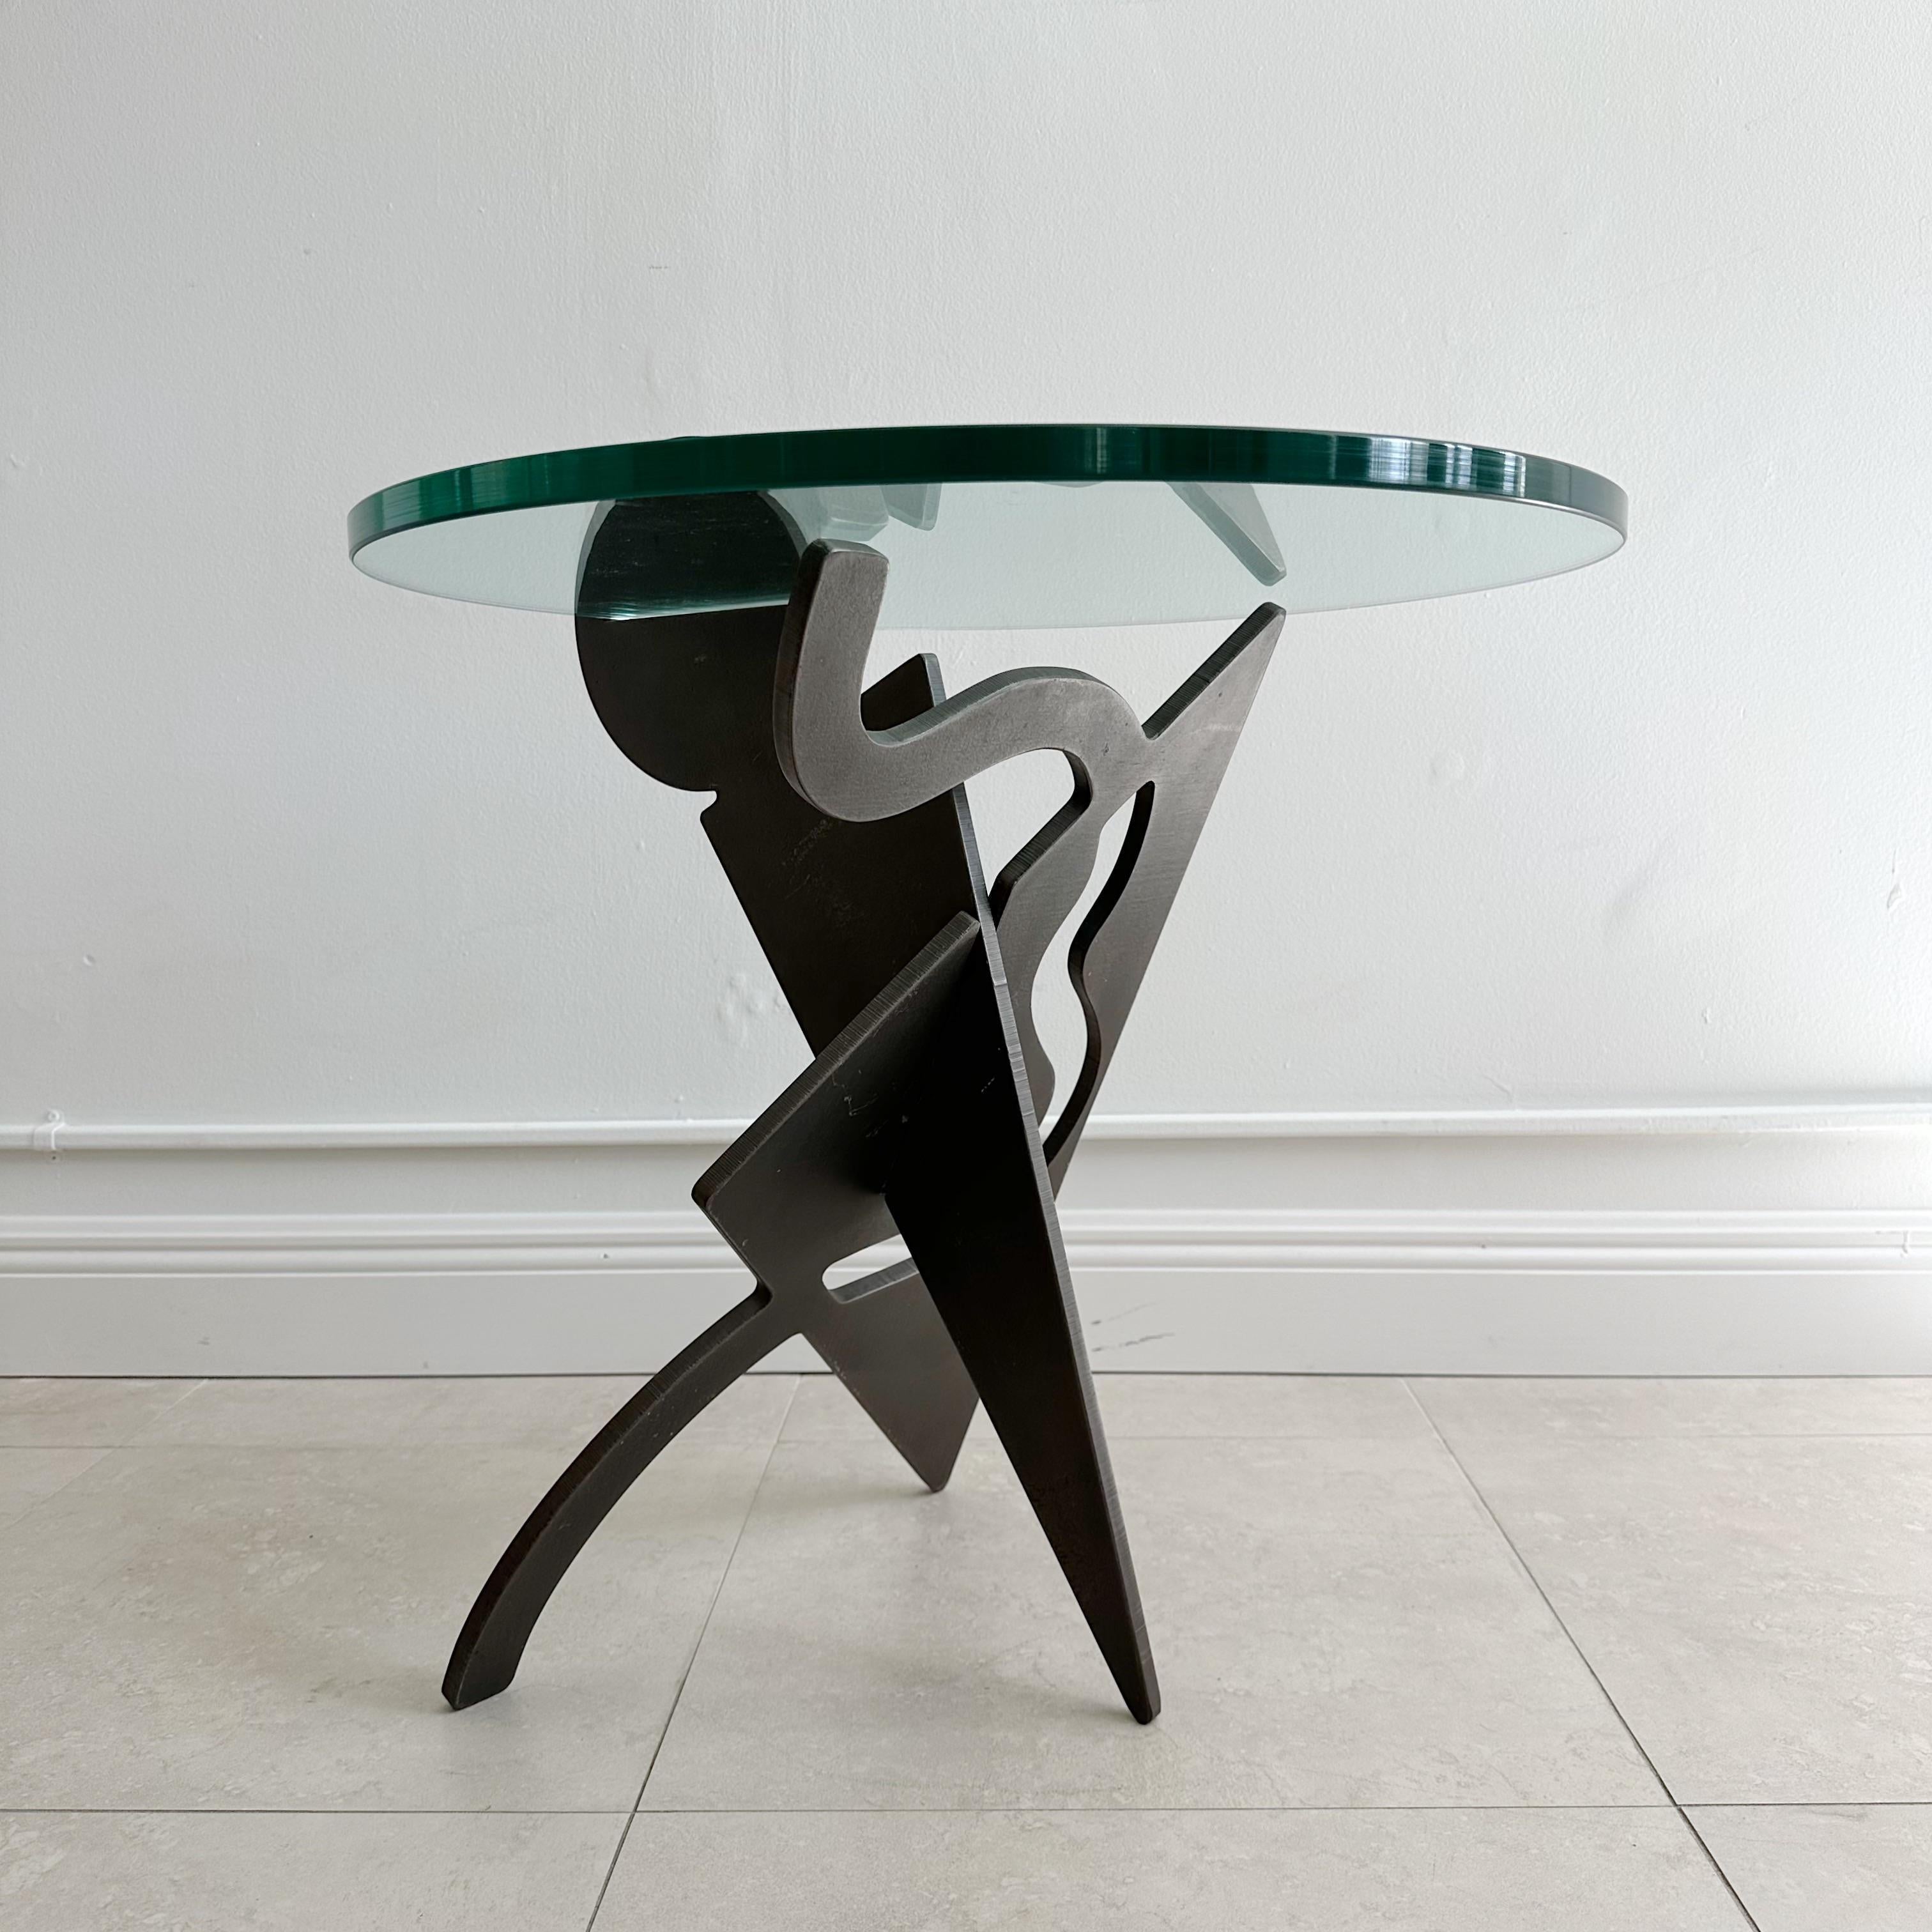 Pucci De Rossi
(1947-2013)
Occasional table with two interlocking panels of ⅝” thick steel cut into abstract forms with one piece of 3/4